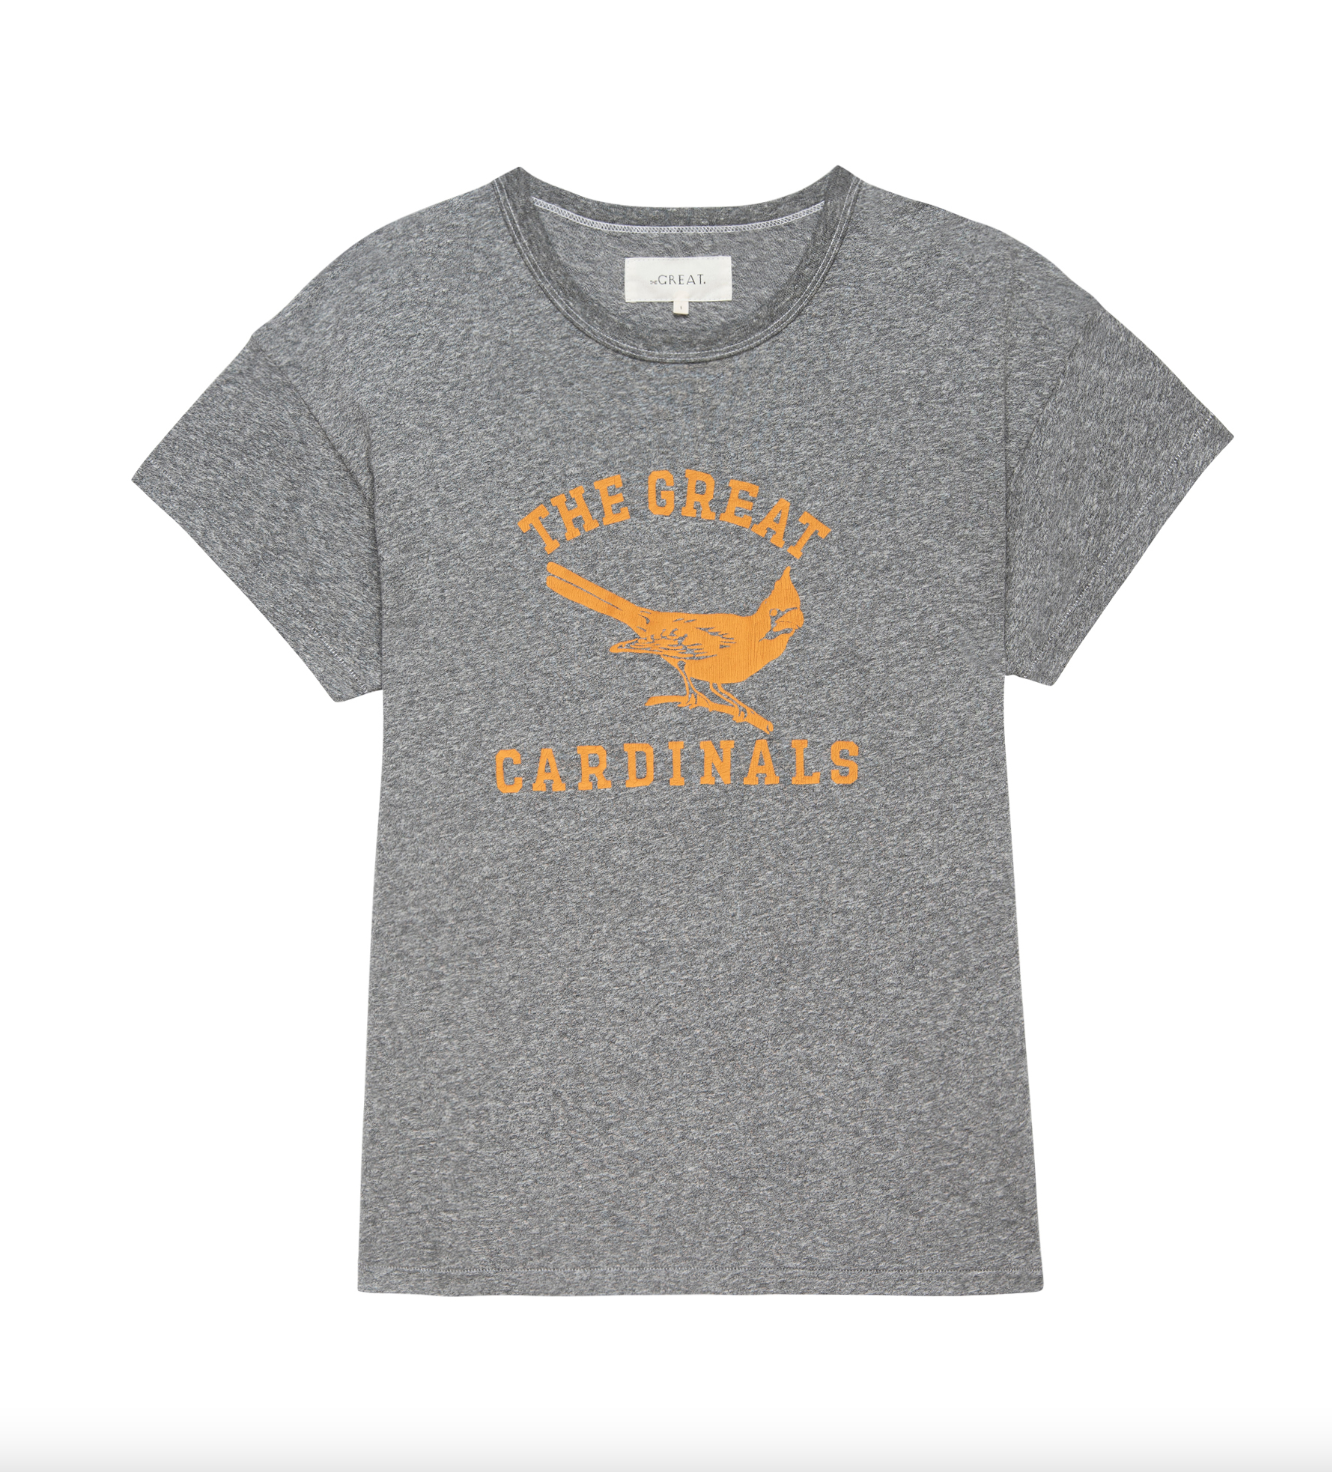 A gray Boxy Crew t-shirt with the text "THE GREAT CARDINALS" and an illustration of a cardinal bird in orange, displayed on a plain white background, representing Scottsdale Arizona by The Great Inc.